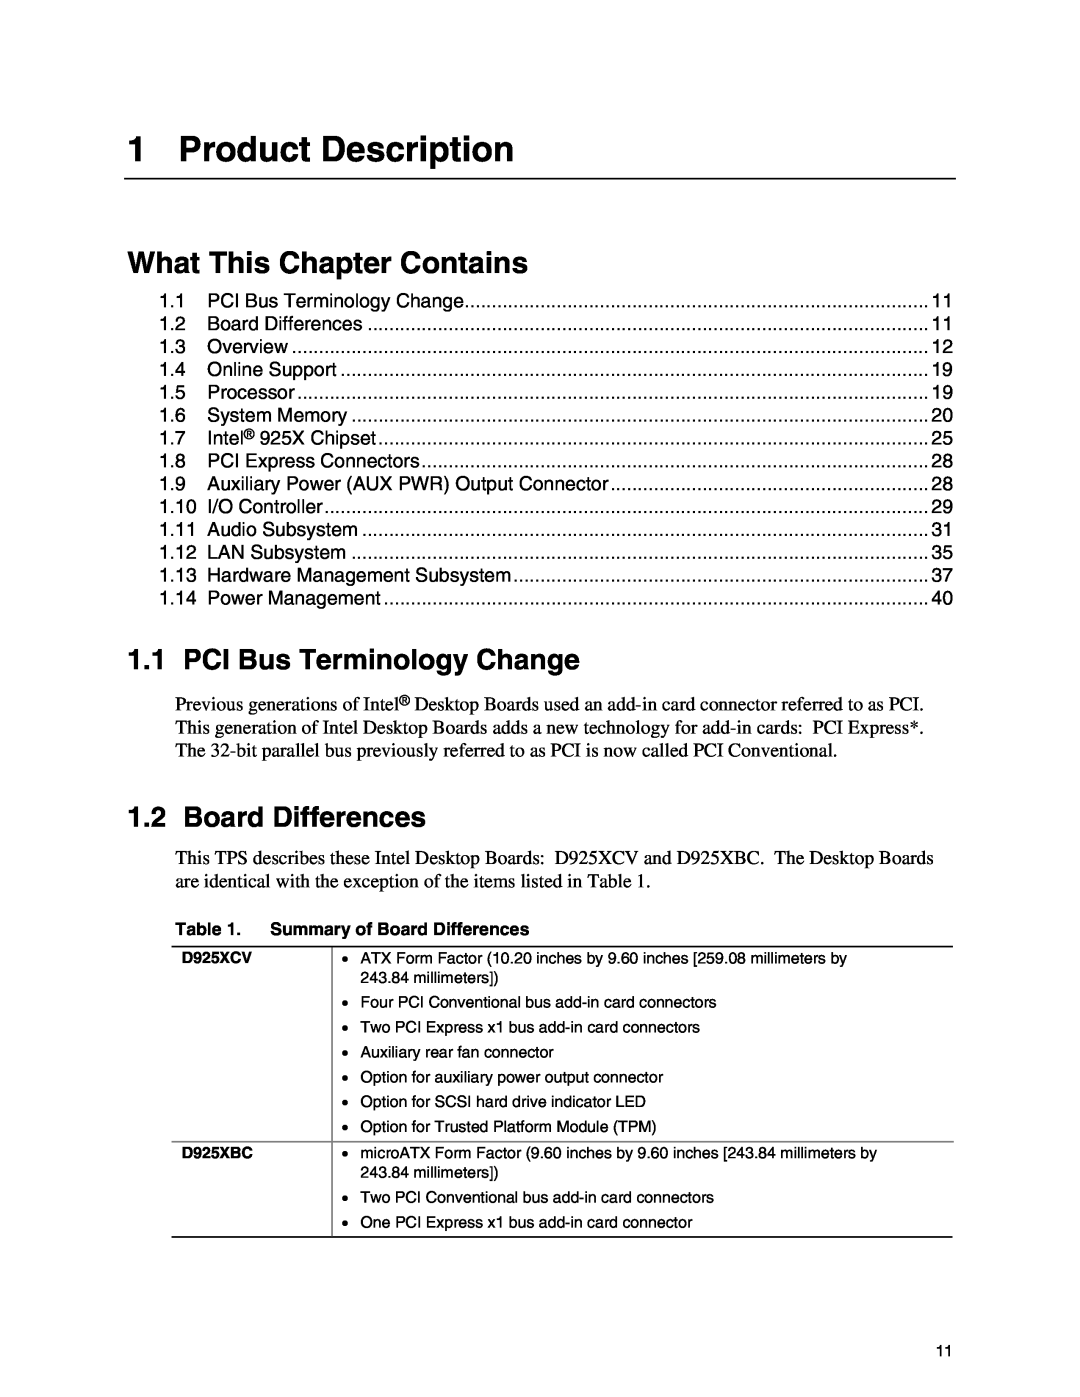 Intel D925XBC, D925XCV Product Description, What This Chapter Contains, PCI Bus Terminology Change, Board Differences 